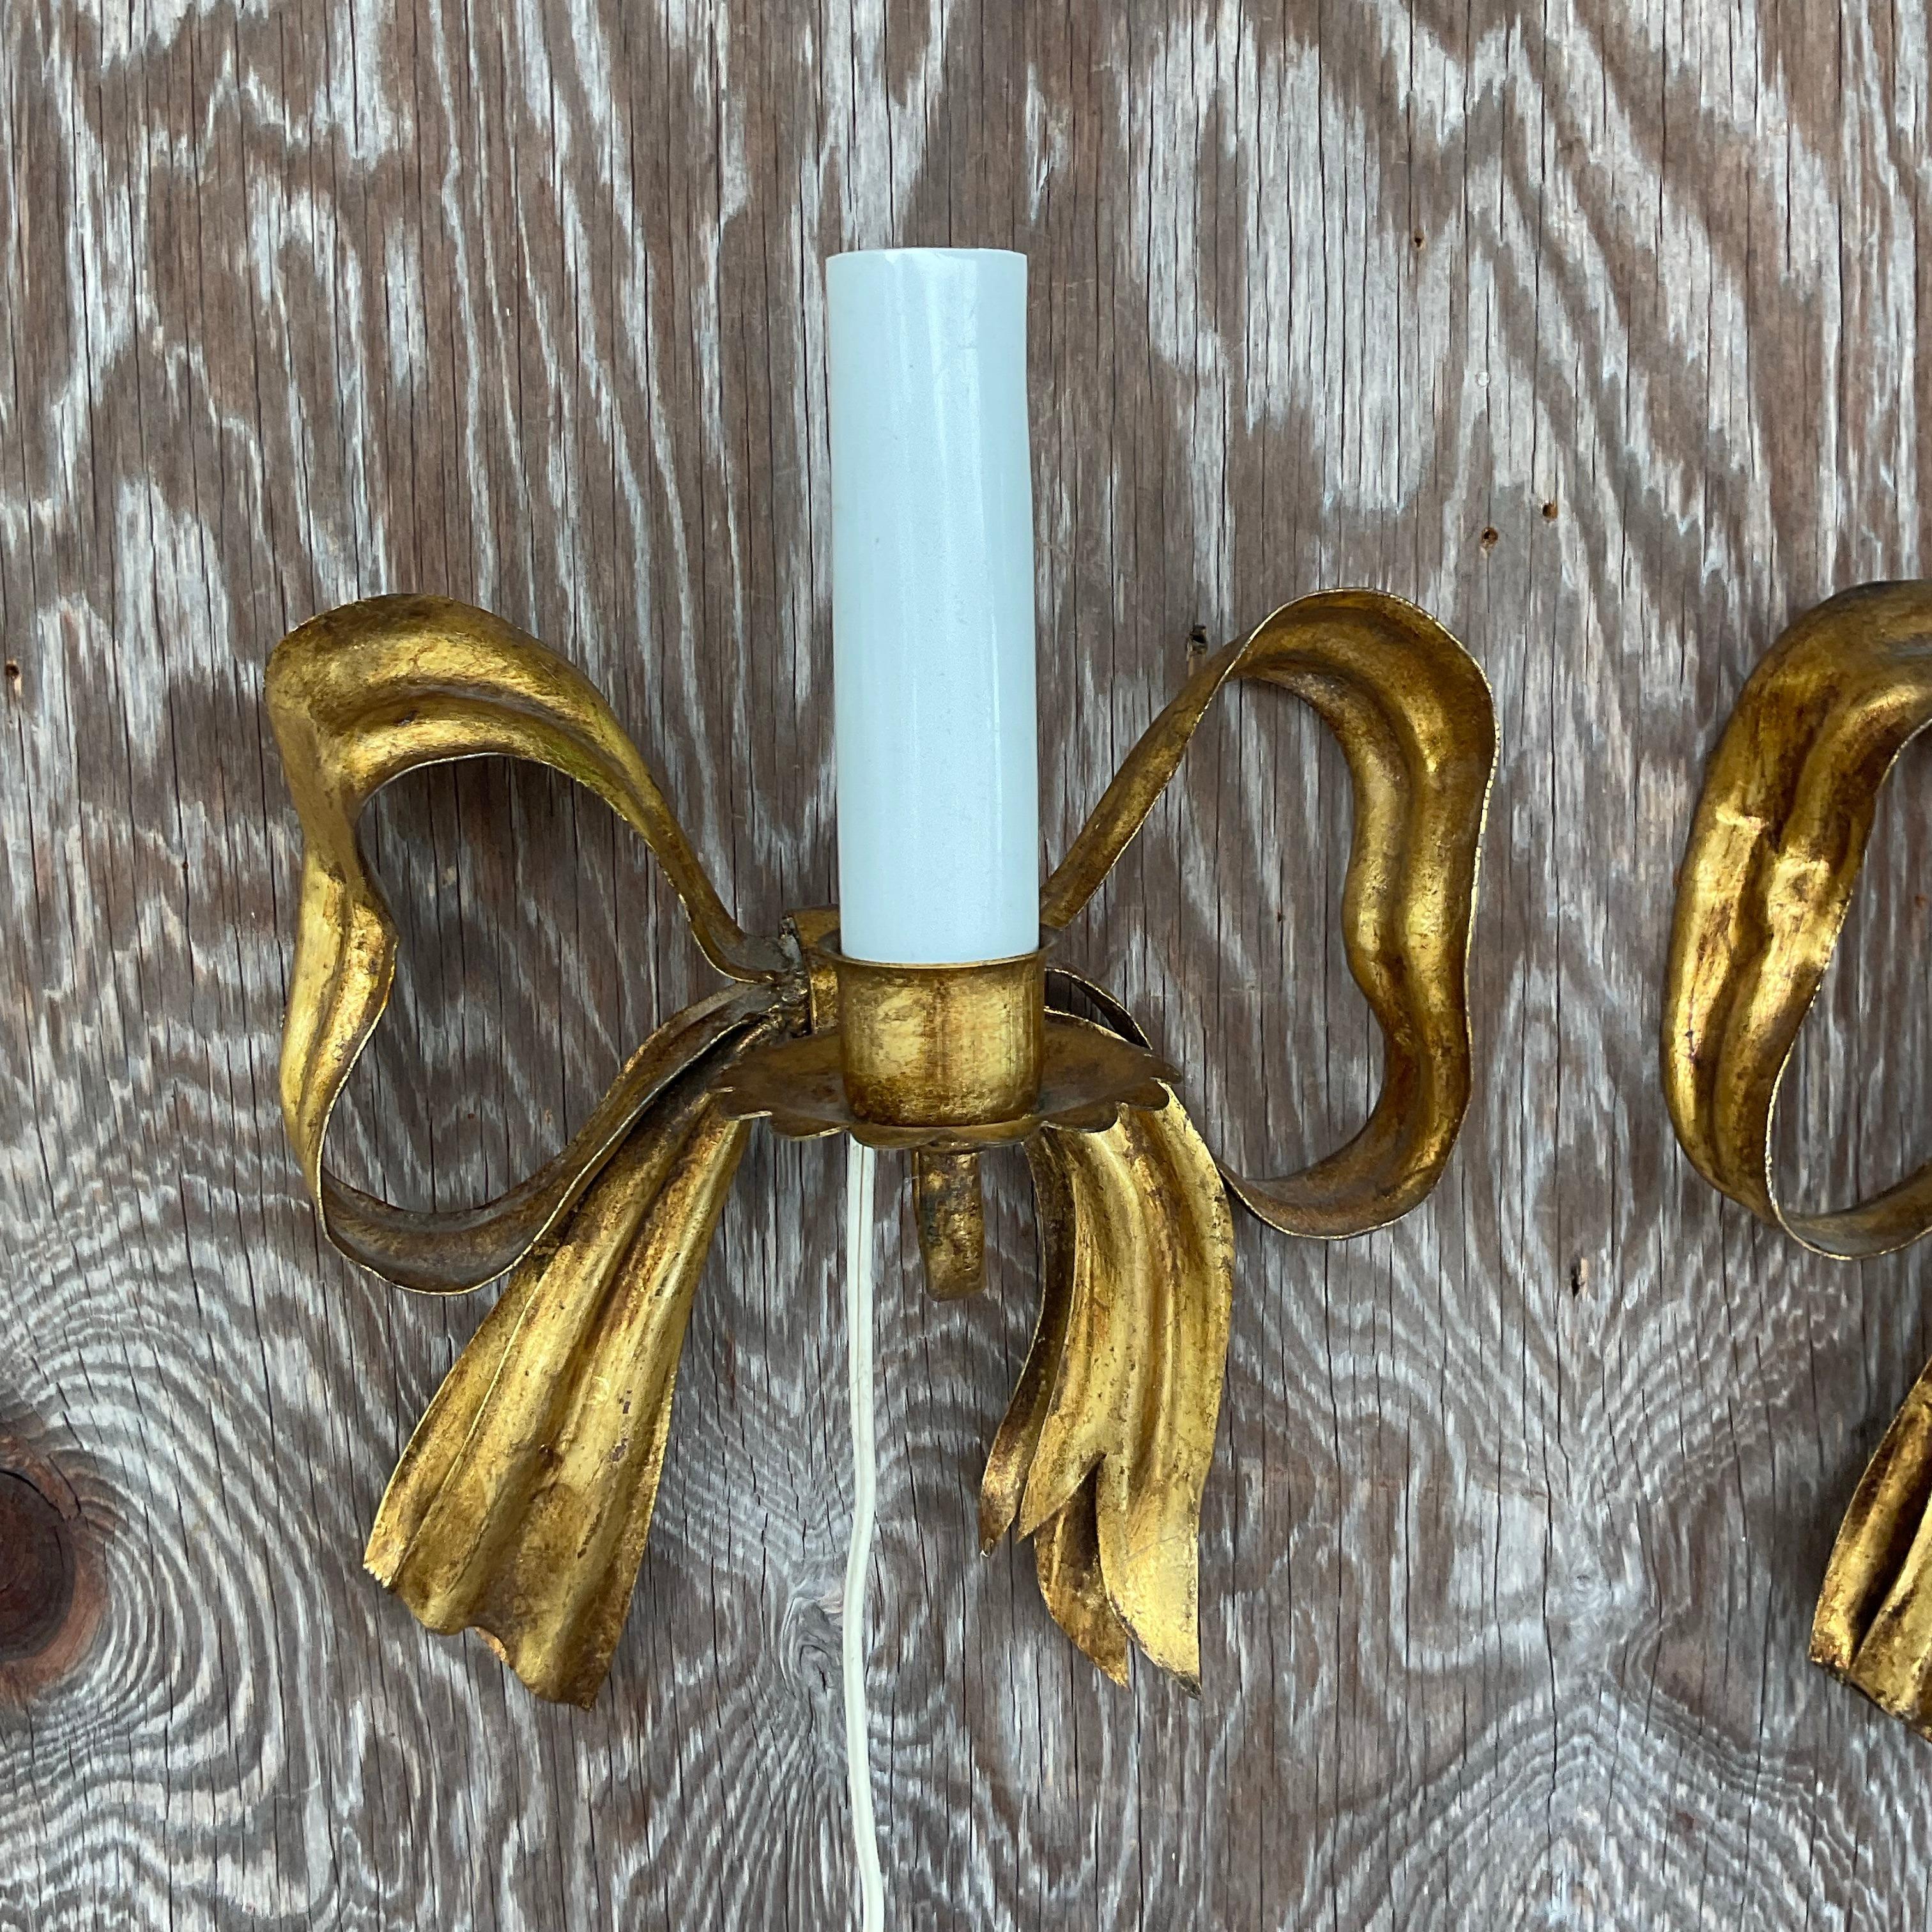 Elevate your décor with a touch of timeless elegance courtesy of our Vintage Regency Gilt Metal Bow Sconces - A Pair. Crafted with meticulous attention to detail, these American-made treasures exude sophistication and add a regal flair to any space